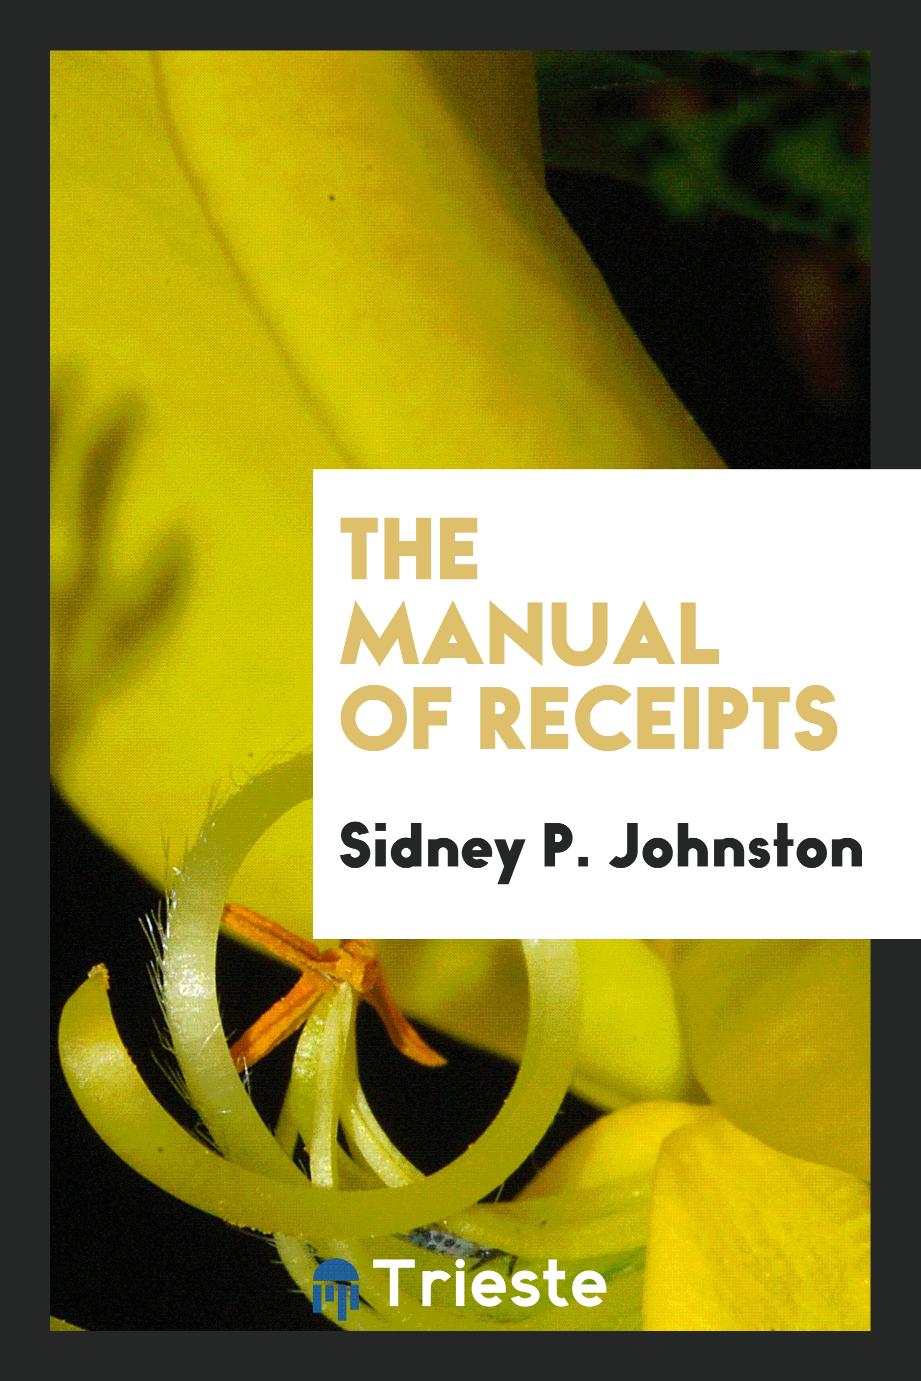 The manual of receipts